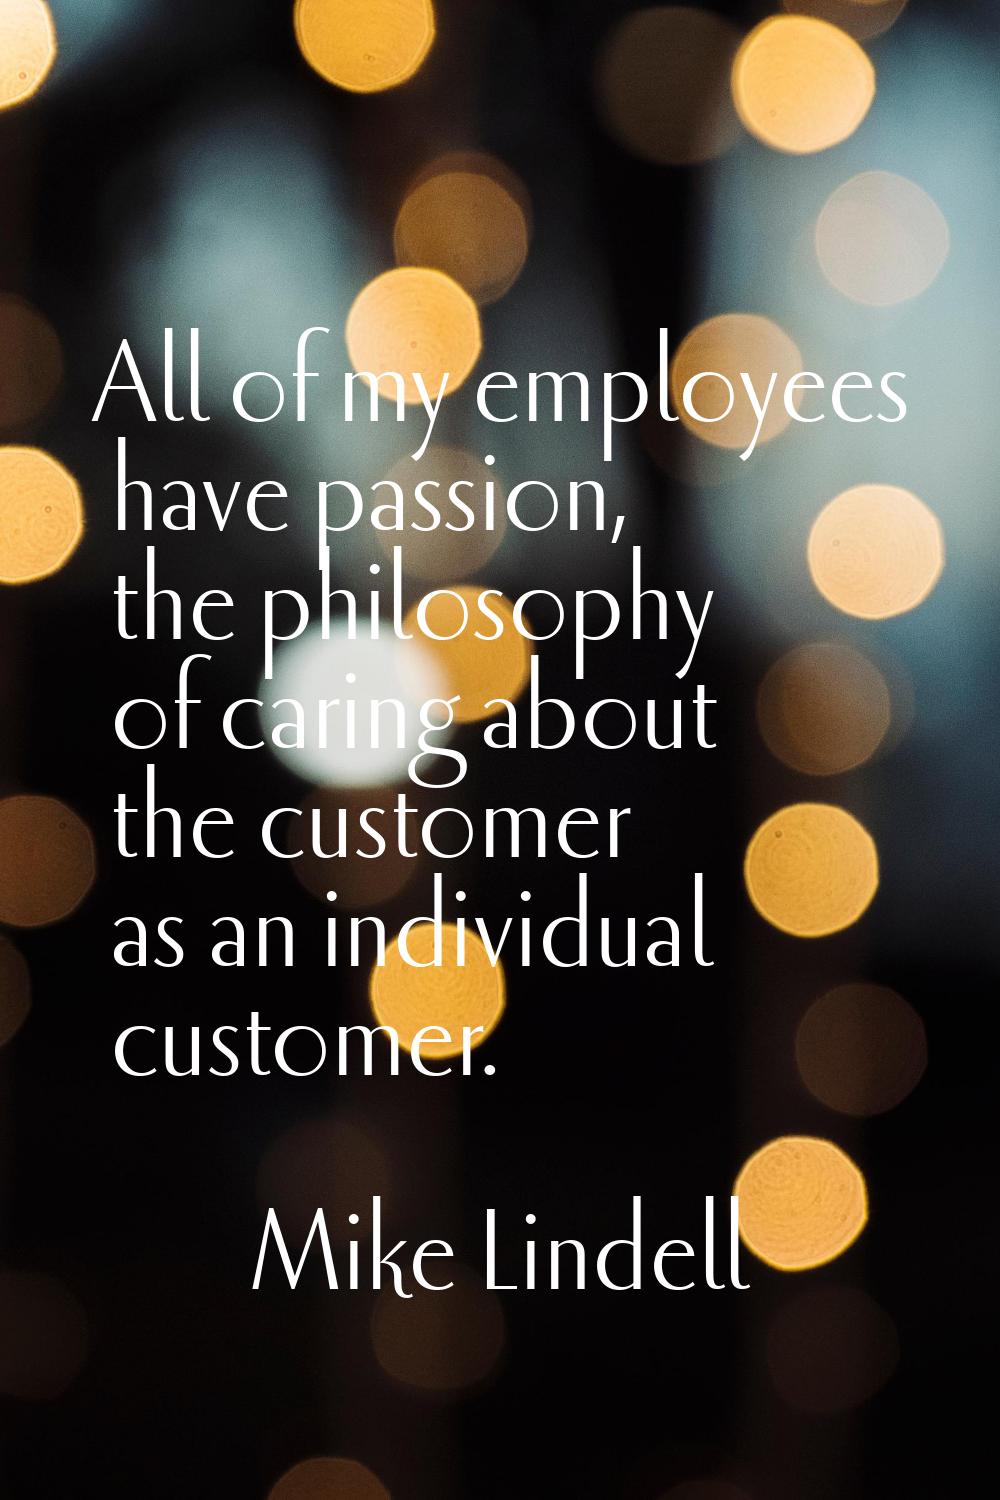 All of my employees have passion, the philosophy of caring about the customer as an individual cust